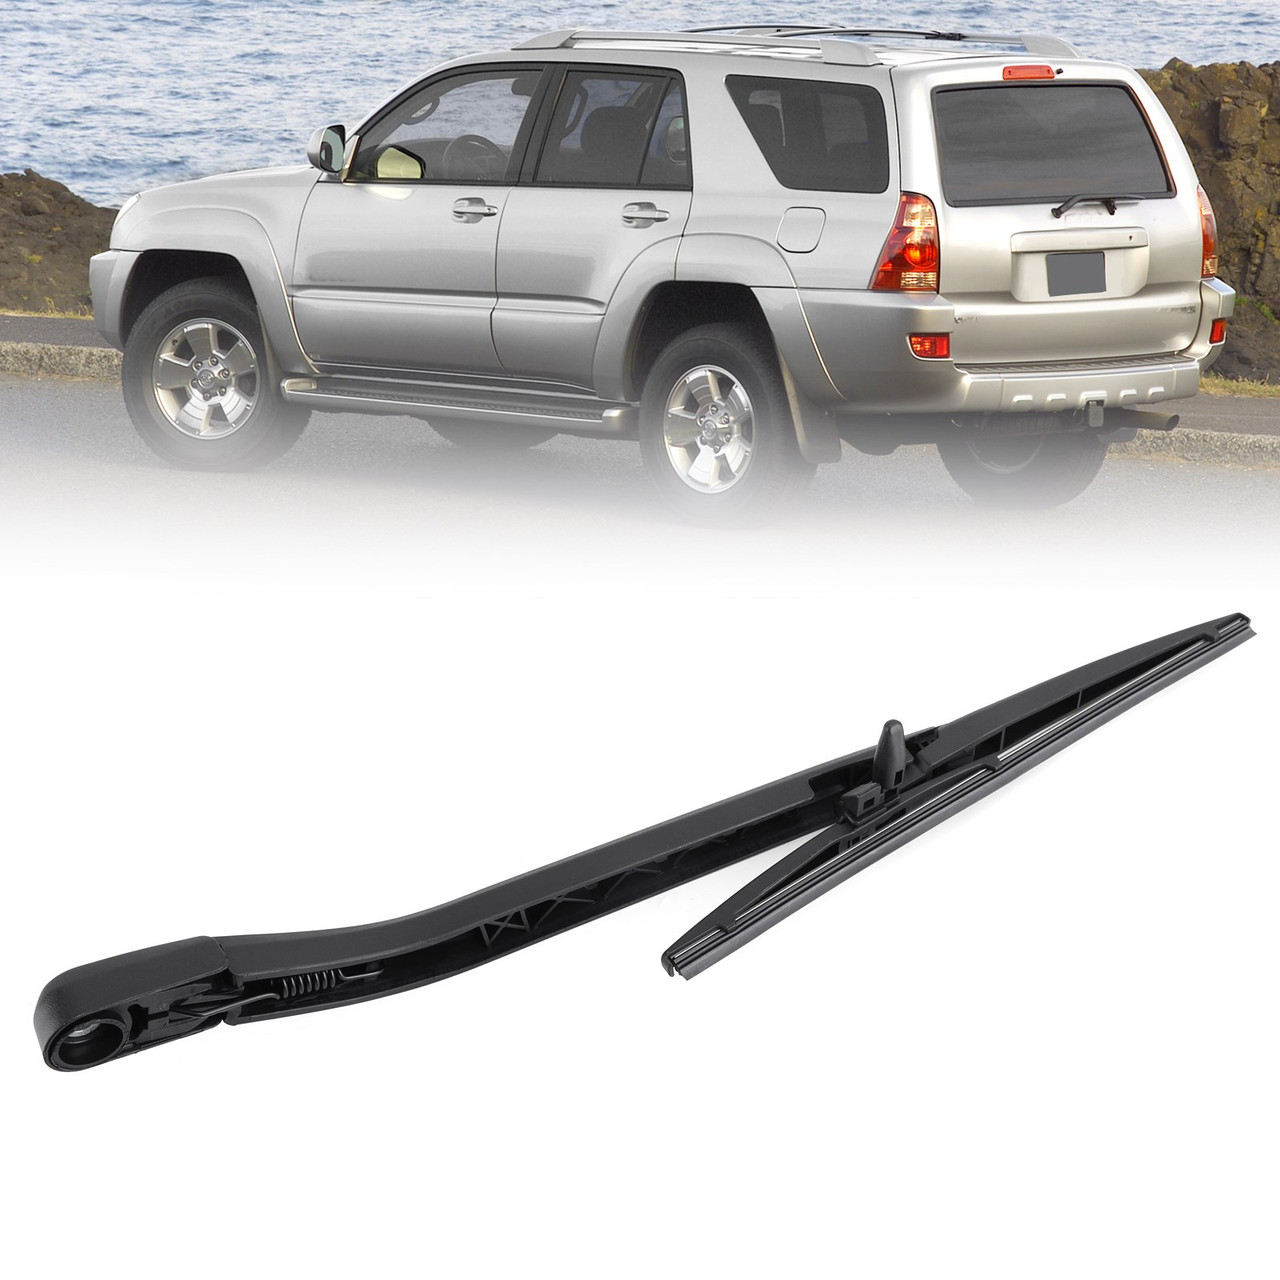 2PCS Rear Windshield Wiper Arm & Blade Fits For Toyota 4Runner 2003-2009 85242-35021 Black